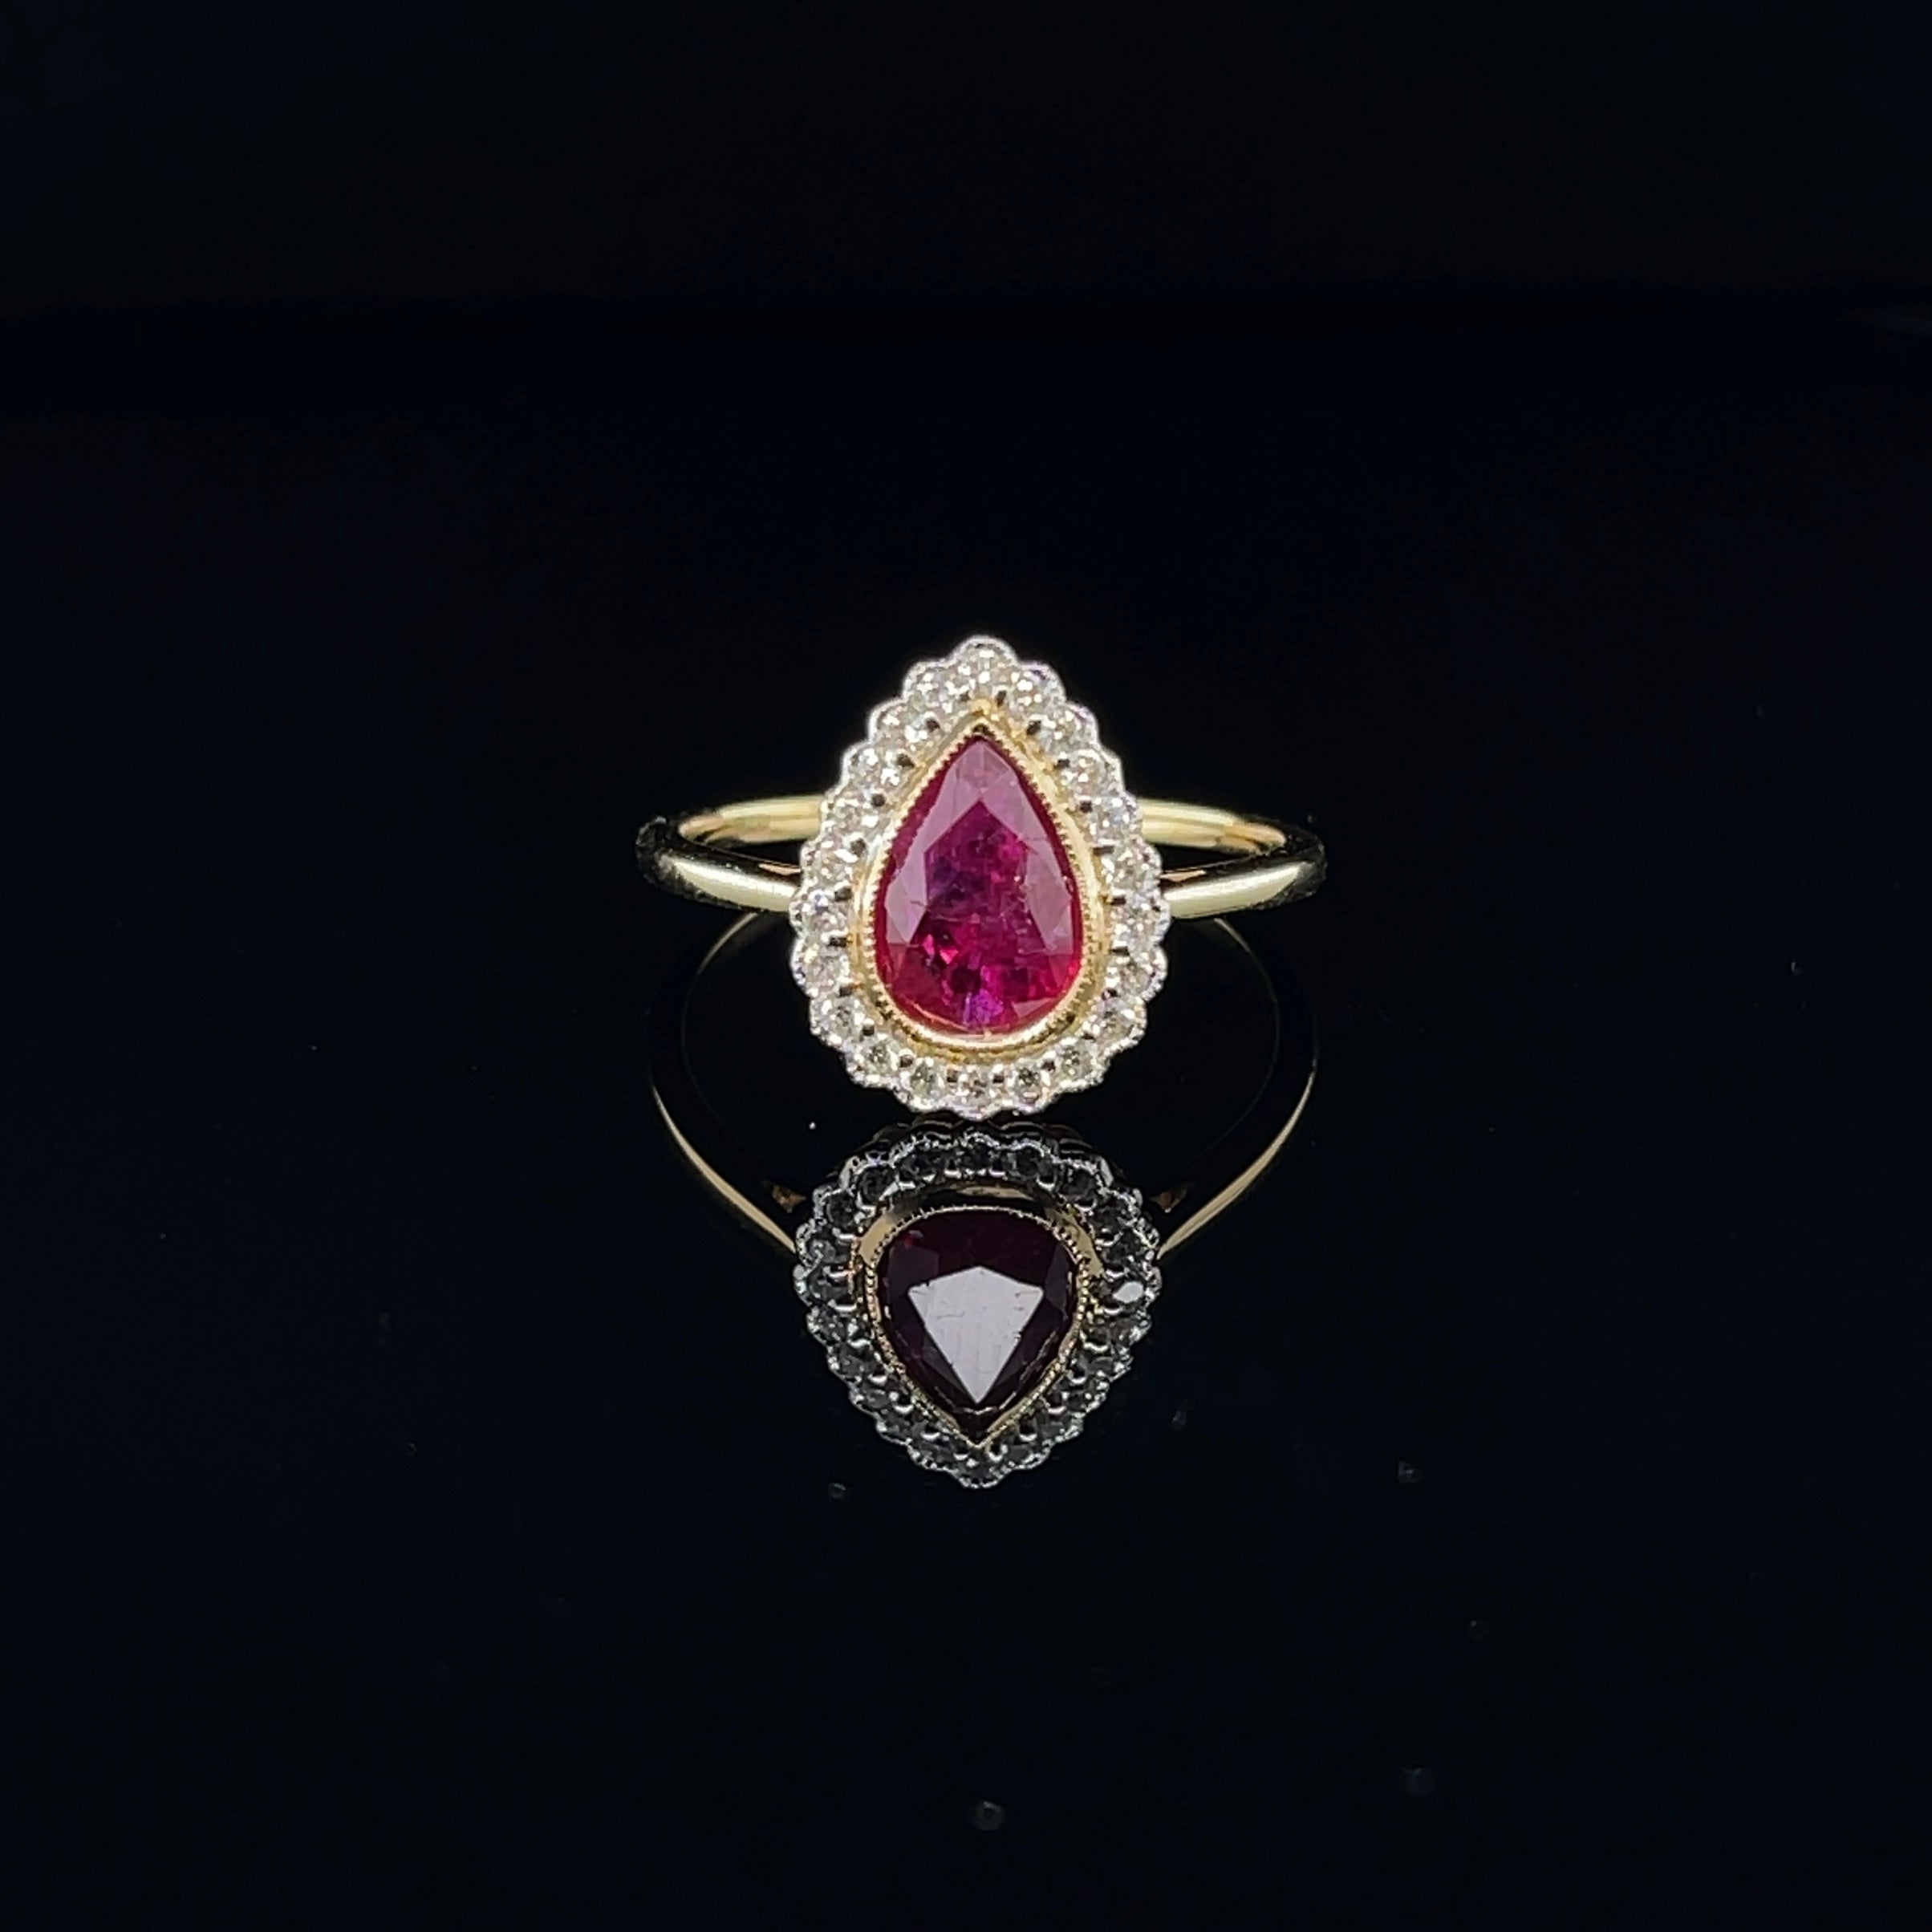 For Sale:  18ct Yellow Gold Ring with 'No Heat' 1.43ct Ruby and Diamond 6